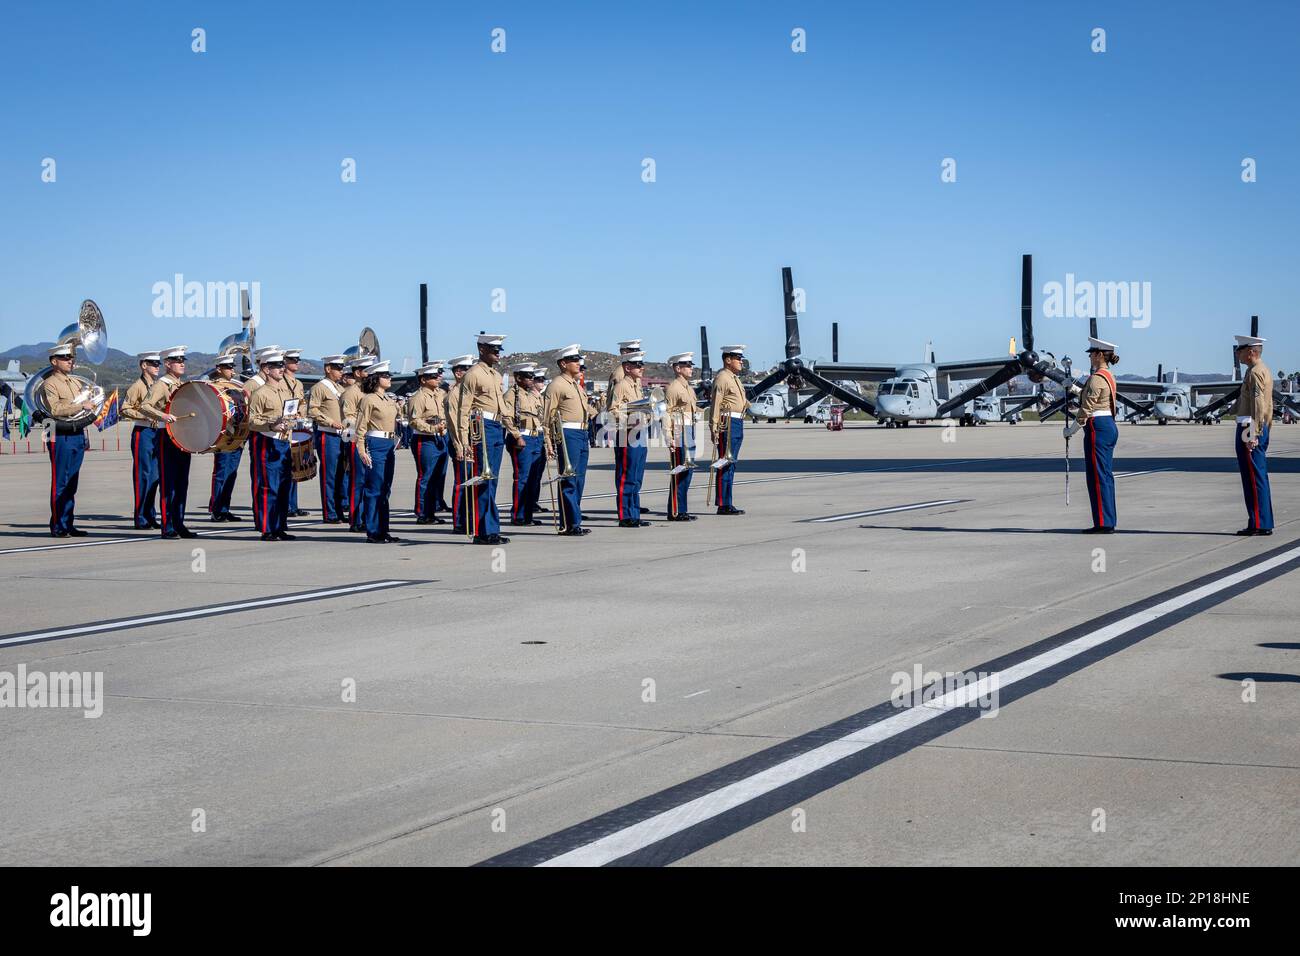 U.S. Marines with the 1st Marine Division Band stand at attention during a relief and appointment ceremony on Marine Corps Air Station Camp Pendleton, California, Feb. 15, 2023. During the ceremony Sgt. Maj. David Gonzalez, the outgoing sergeant major for Headquarters and Headquarters Squadron, MCAS Camp Pendleton, relinquished his duties to Sgt. Maj. Robert Catching. Stock Photo